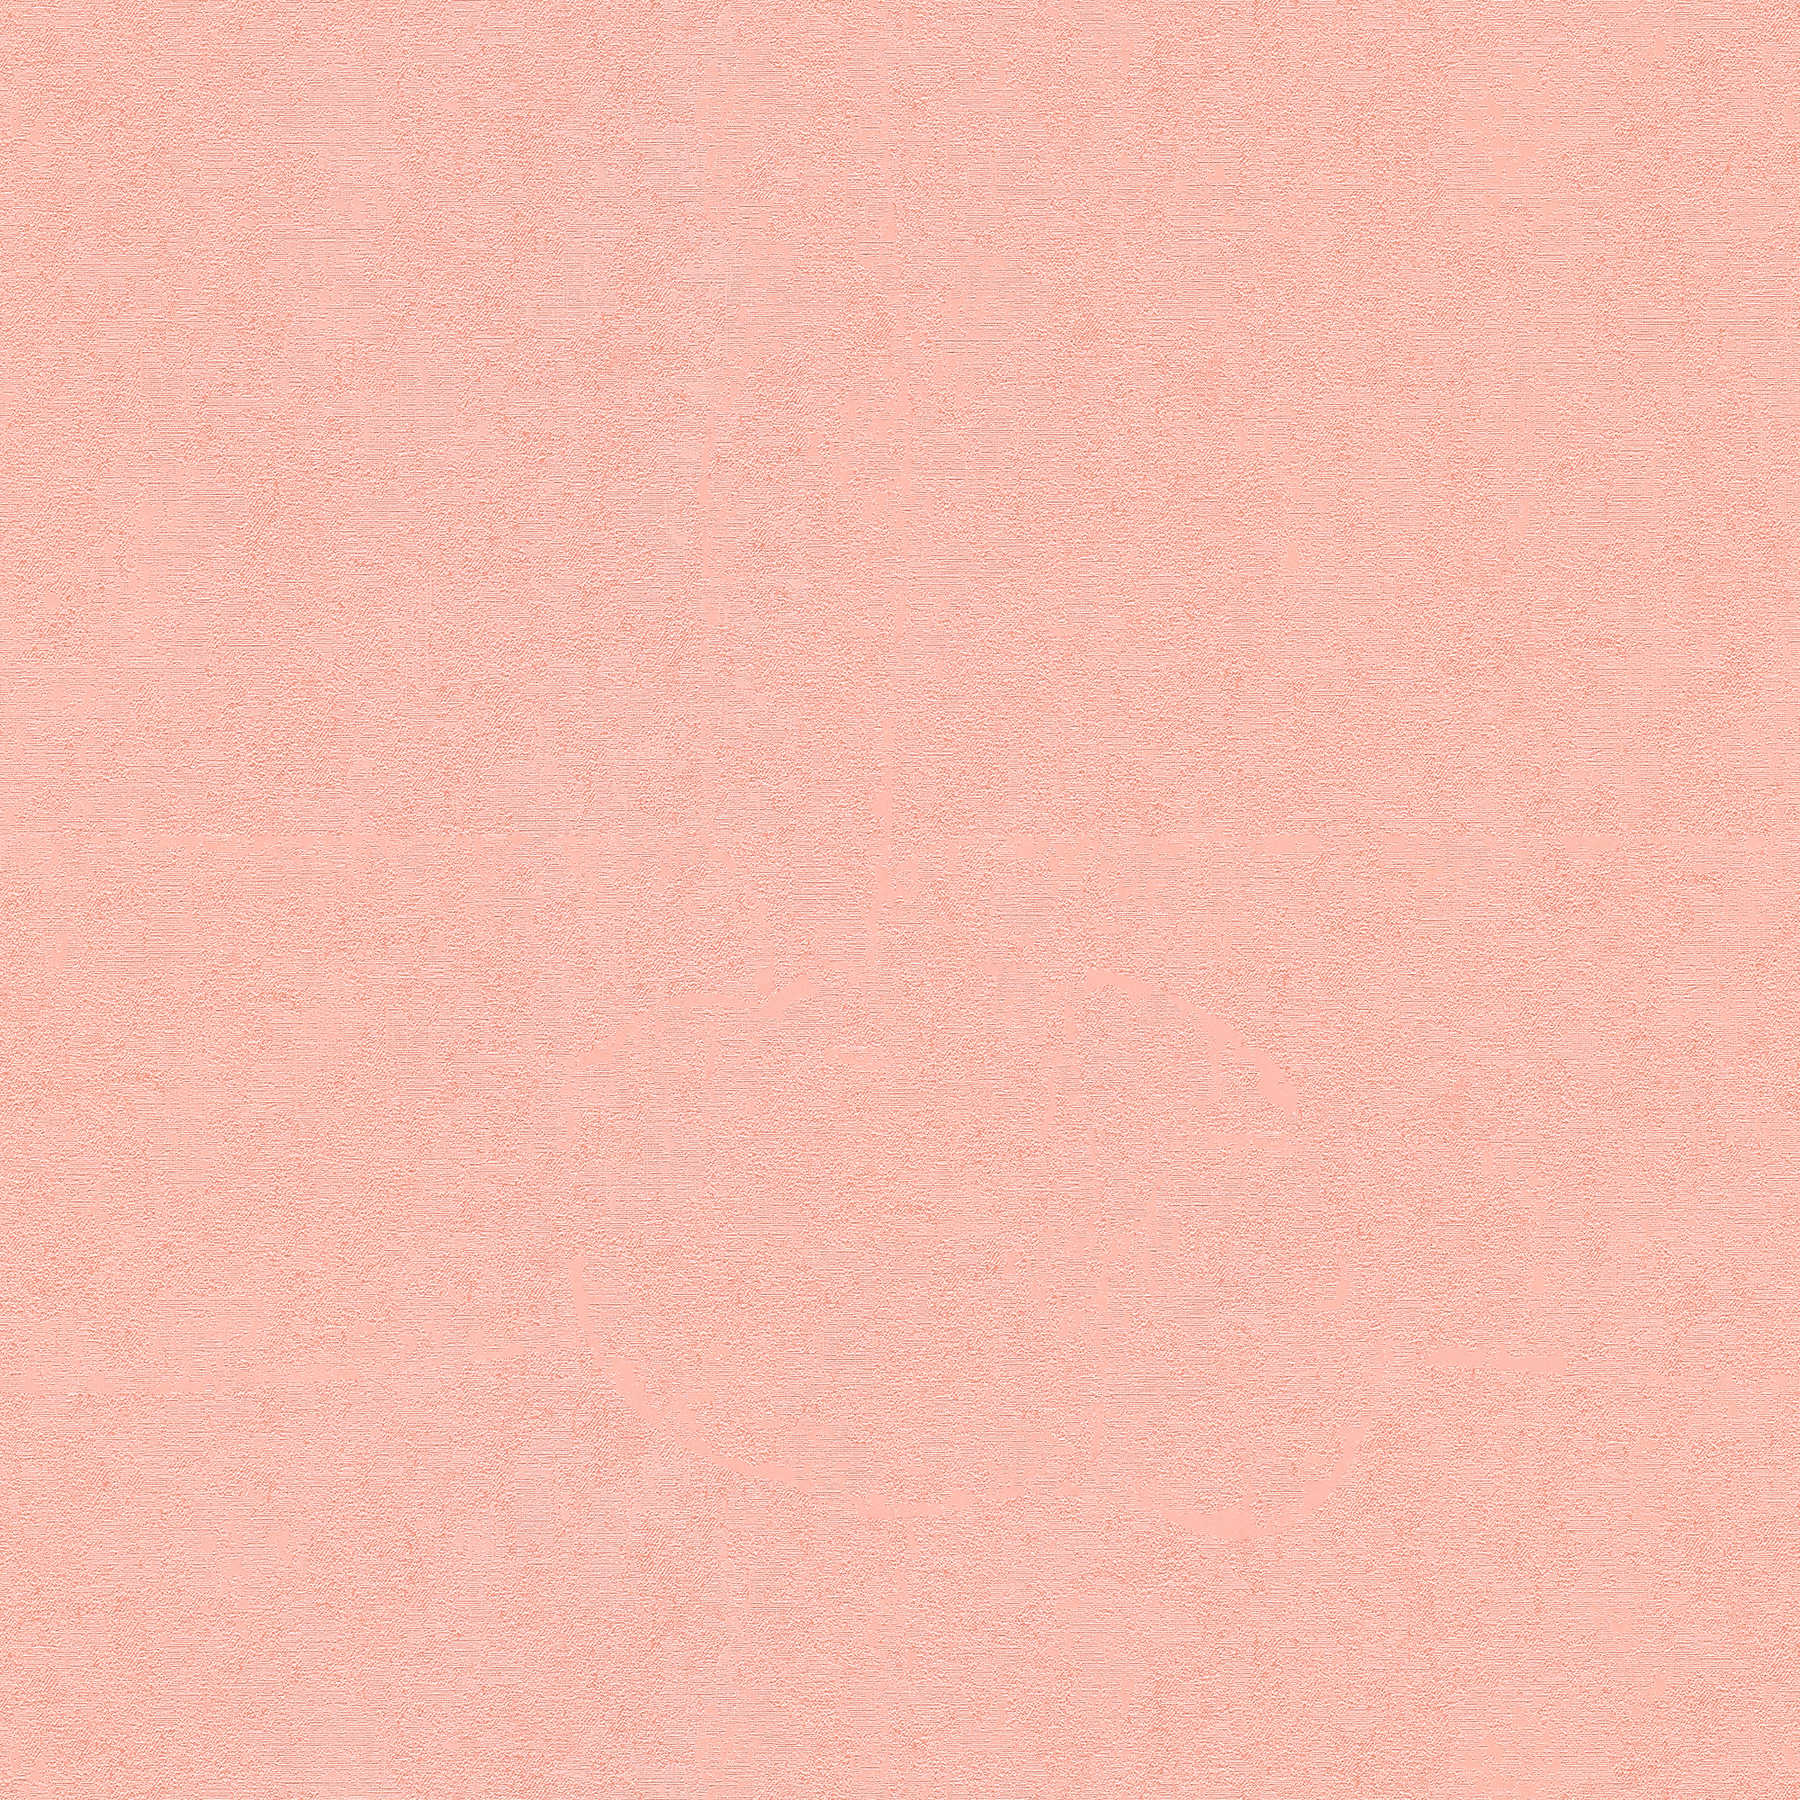 VERSACE Home plain wallpaper pink and shimmer effect - pink
